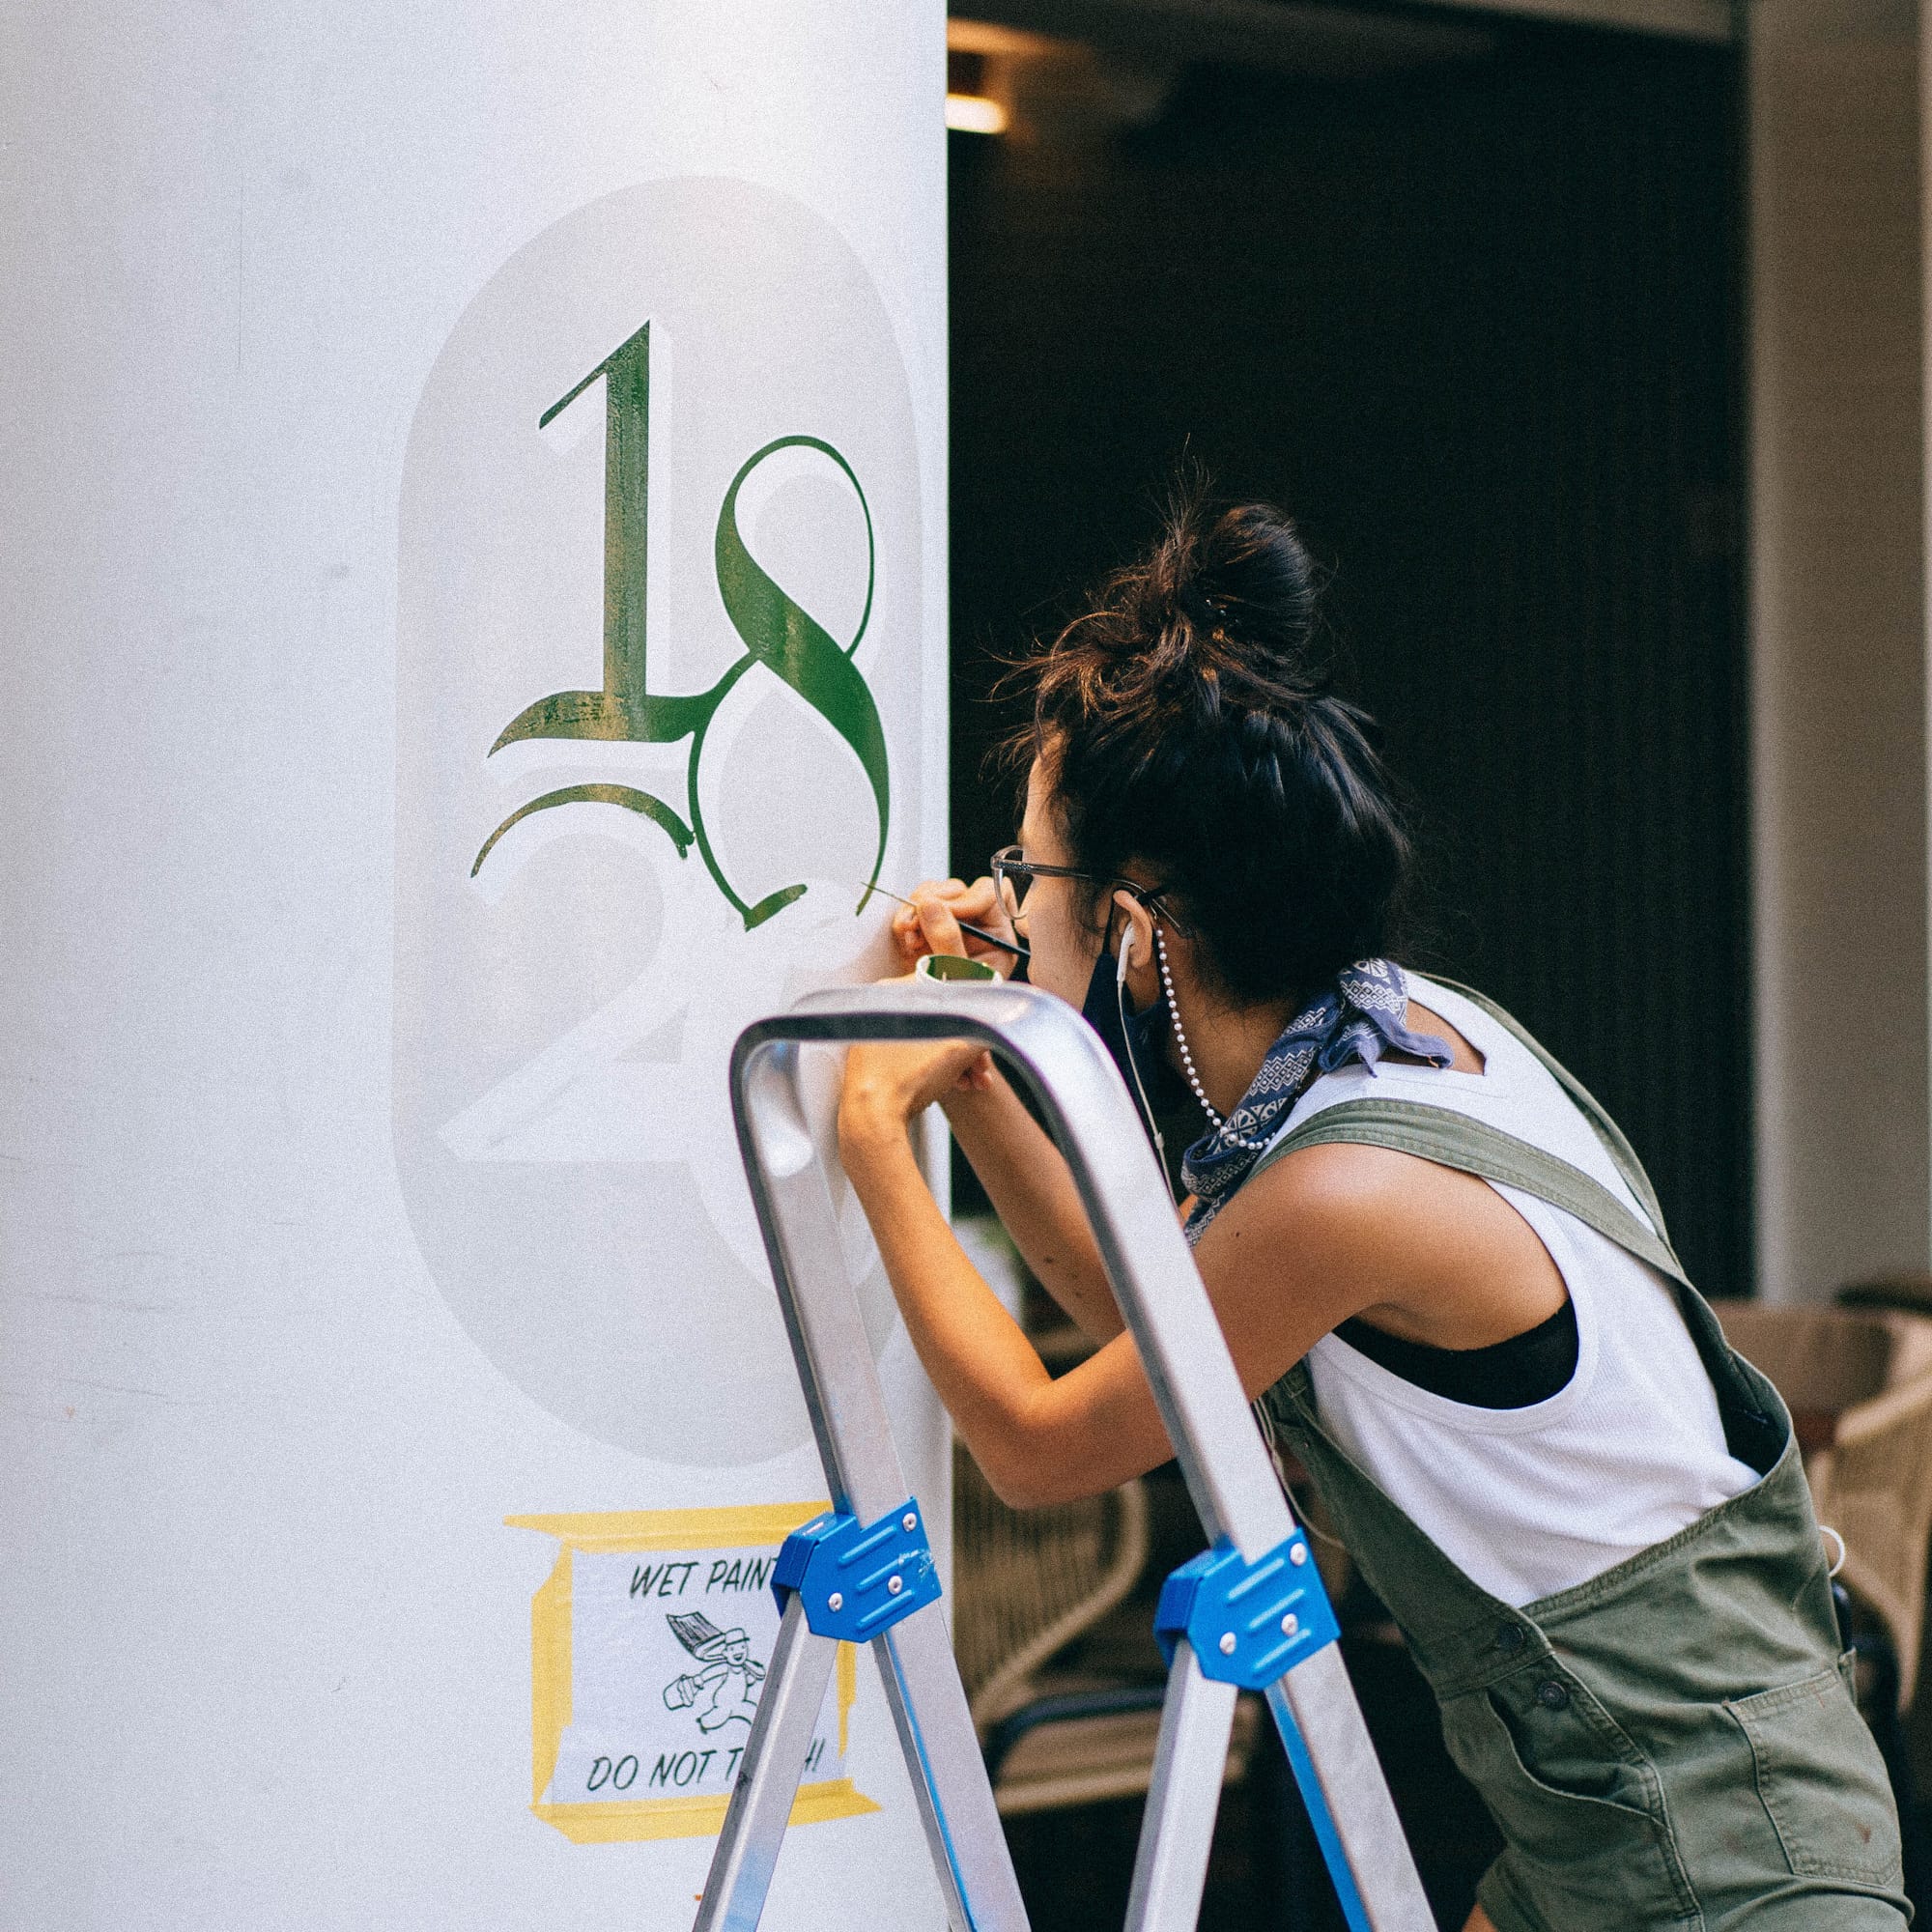 Woman painted numbers in green on a white pillar.